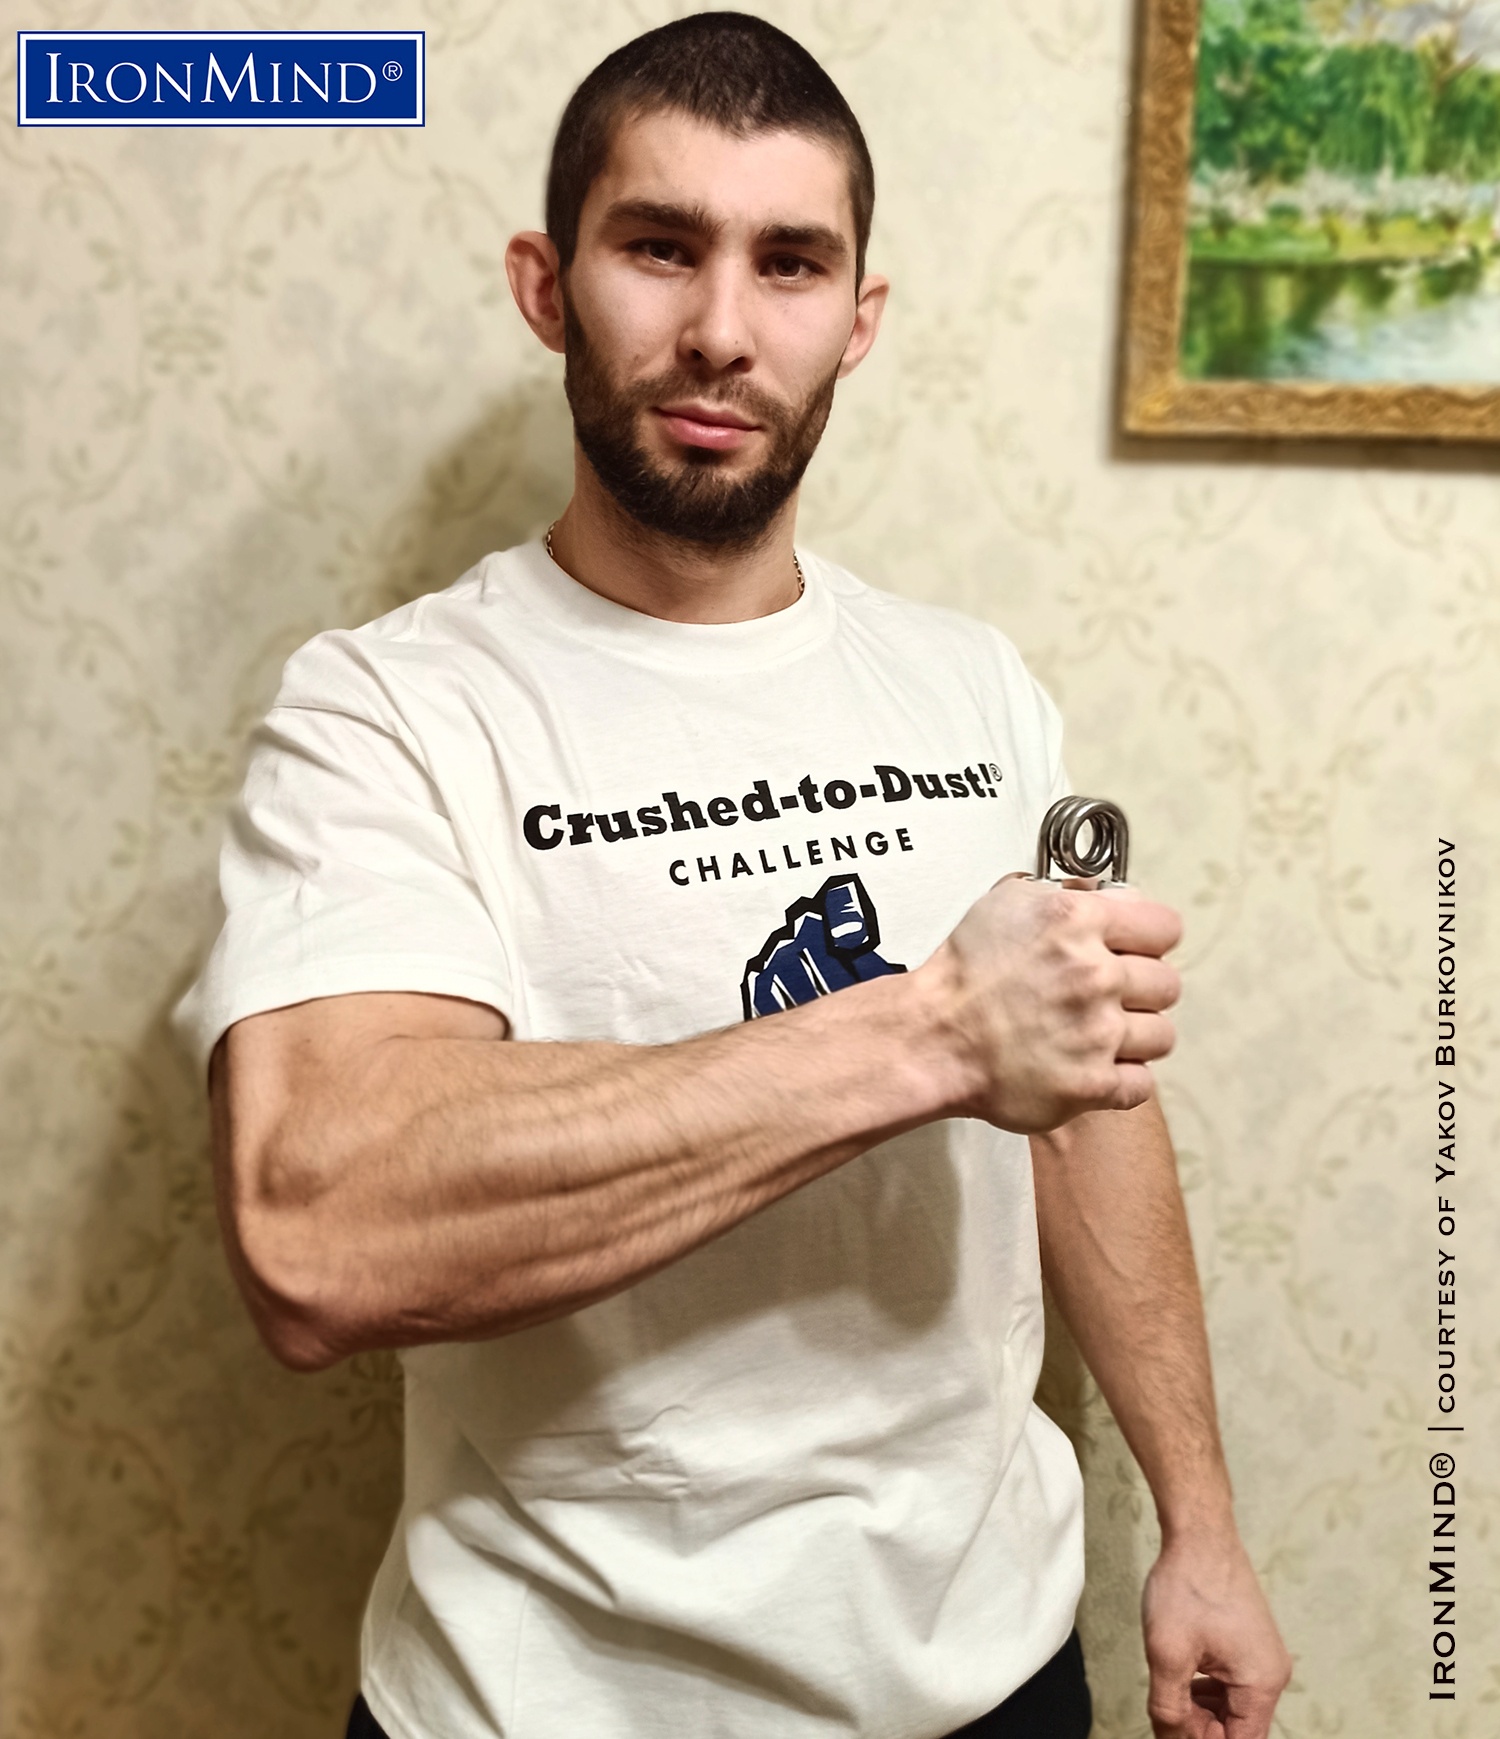 Freshly certified on the Crushed-To-Dust Challenge, Yakov Burkovnikov (Ukraine) has added more luster to grip strength laurels by certifying on the Captains of Crush No. 3 gripper. IronMind® | Courtesy of Yakov Burkovnikov